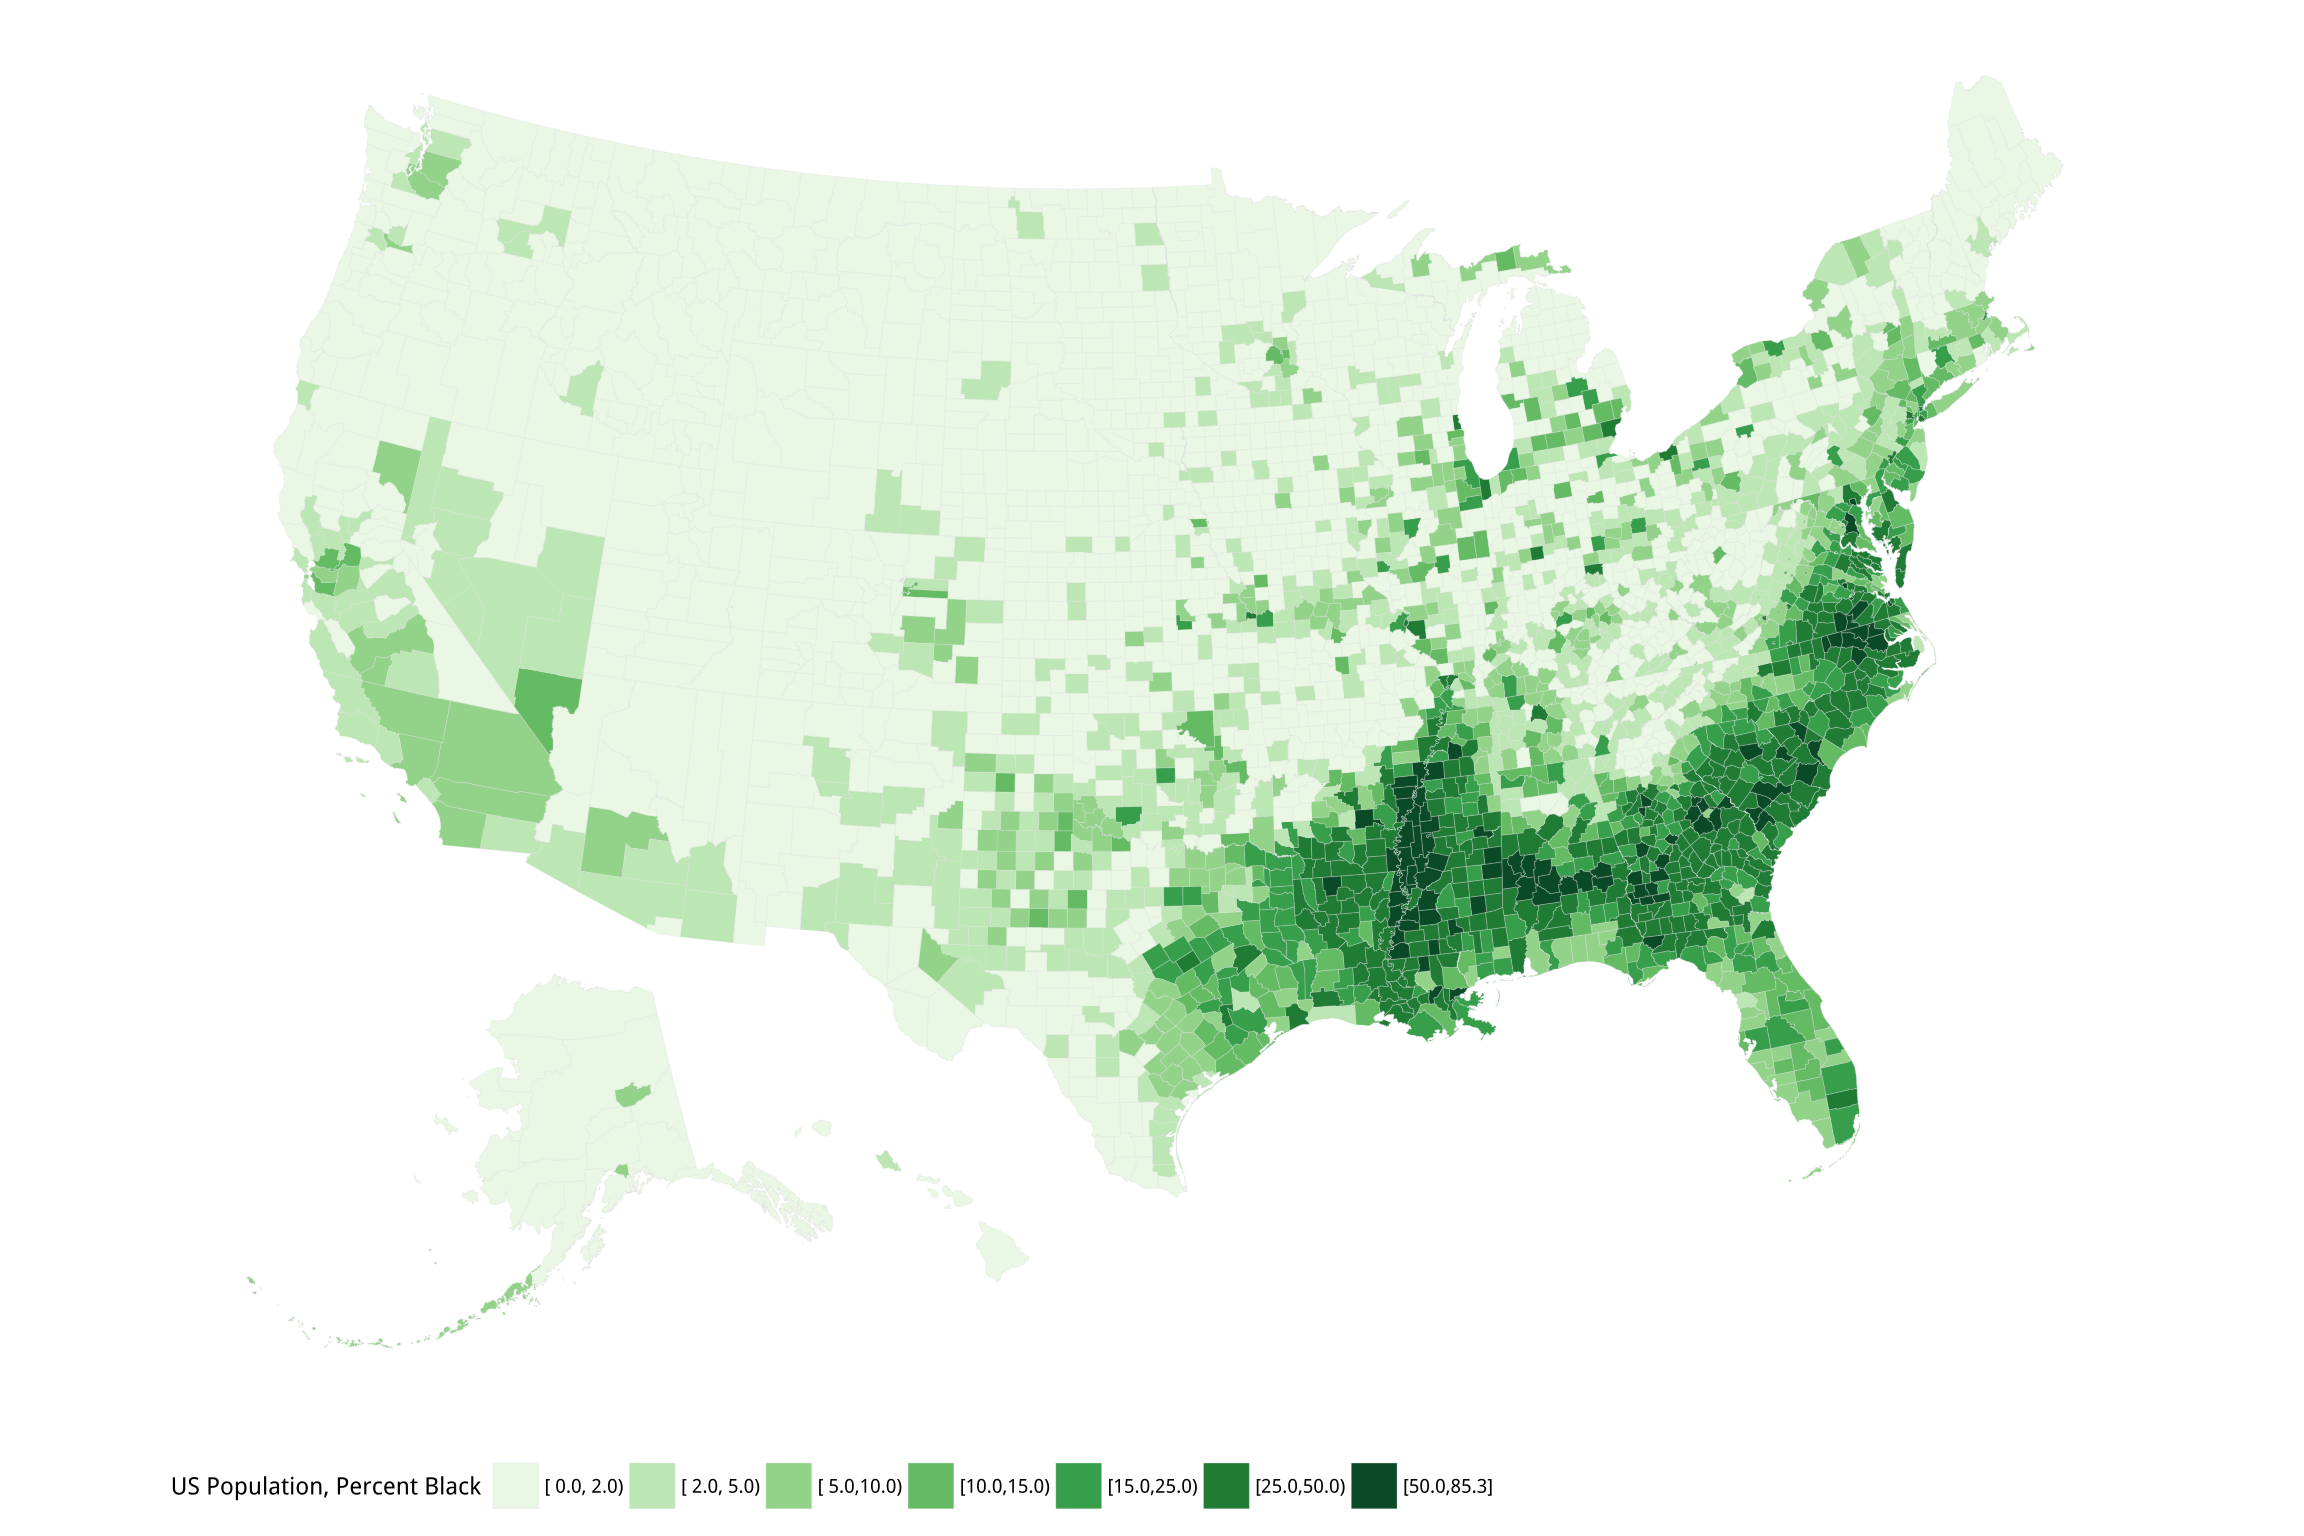 Percent Black population by county.